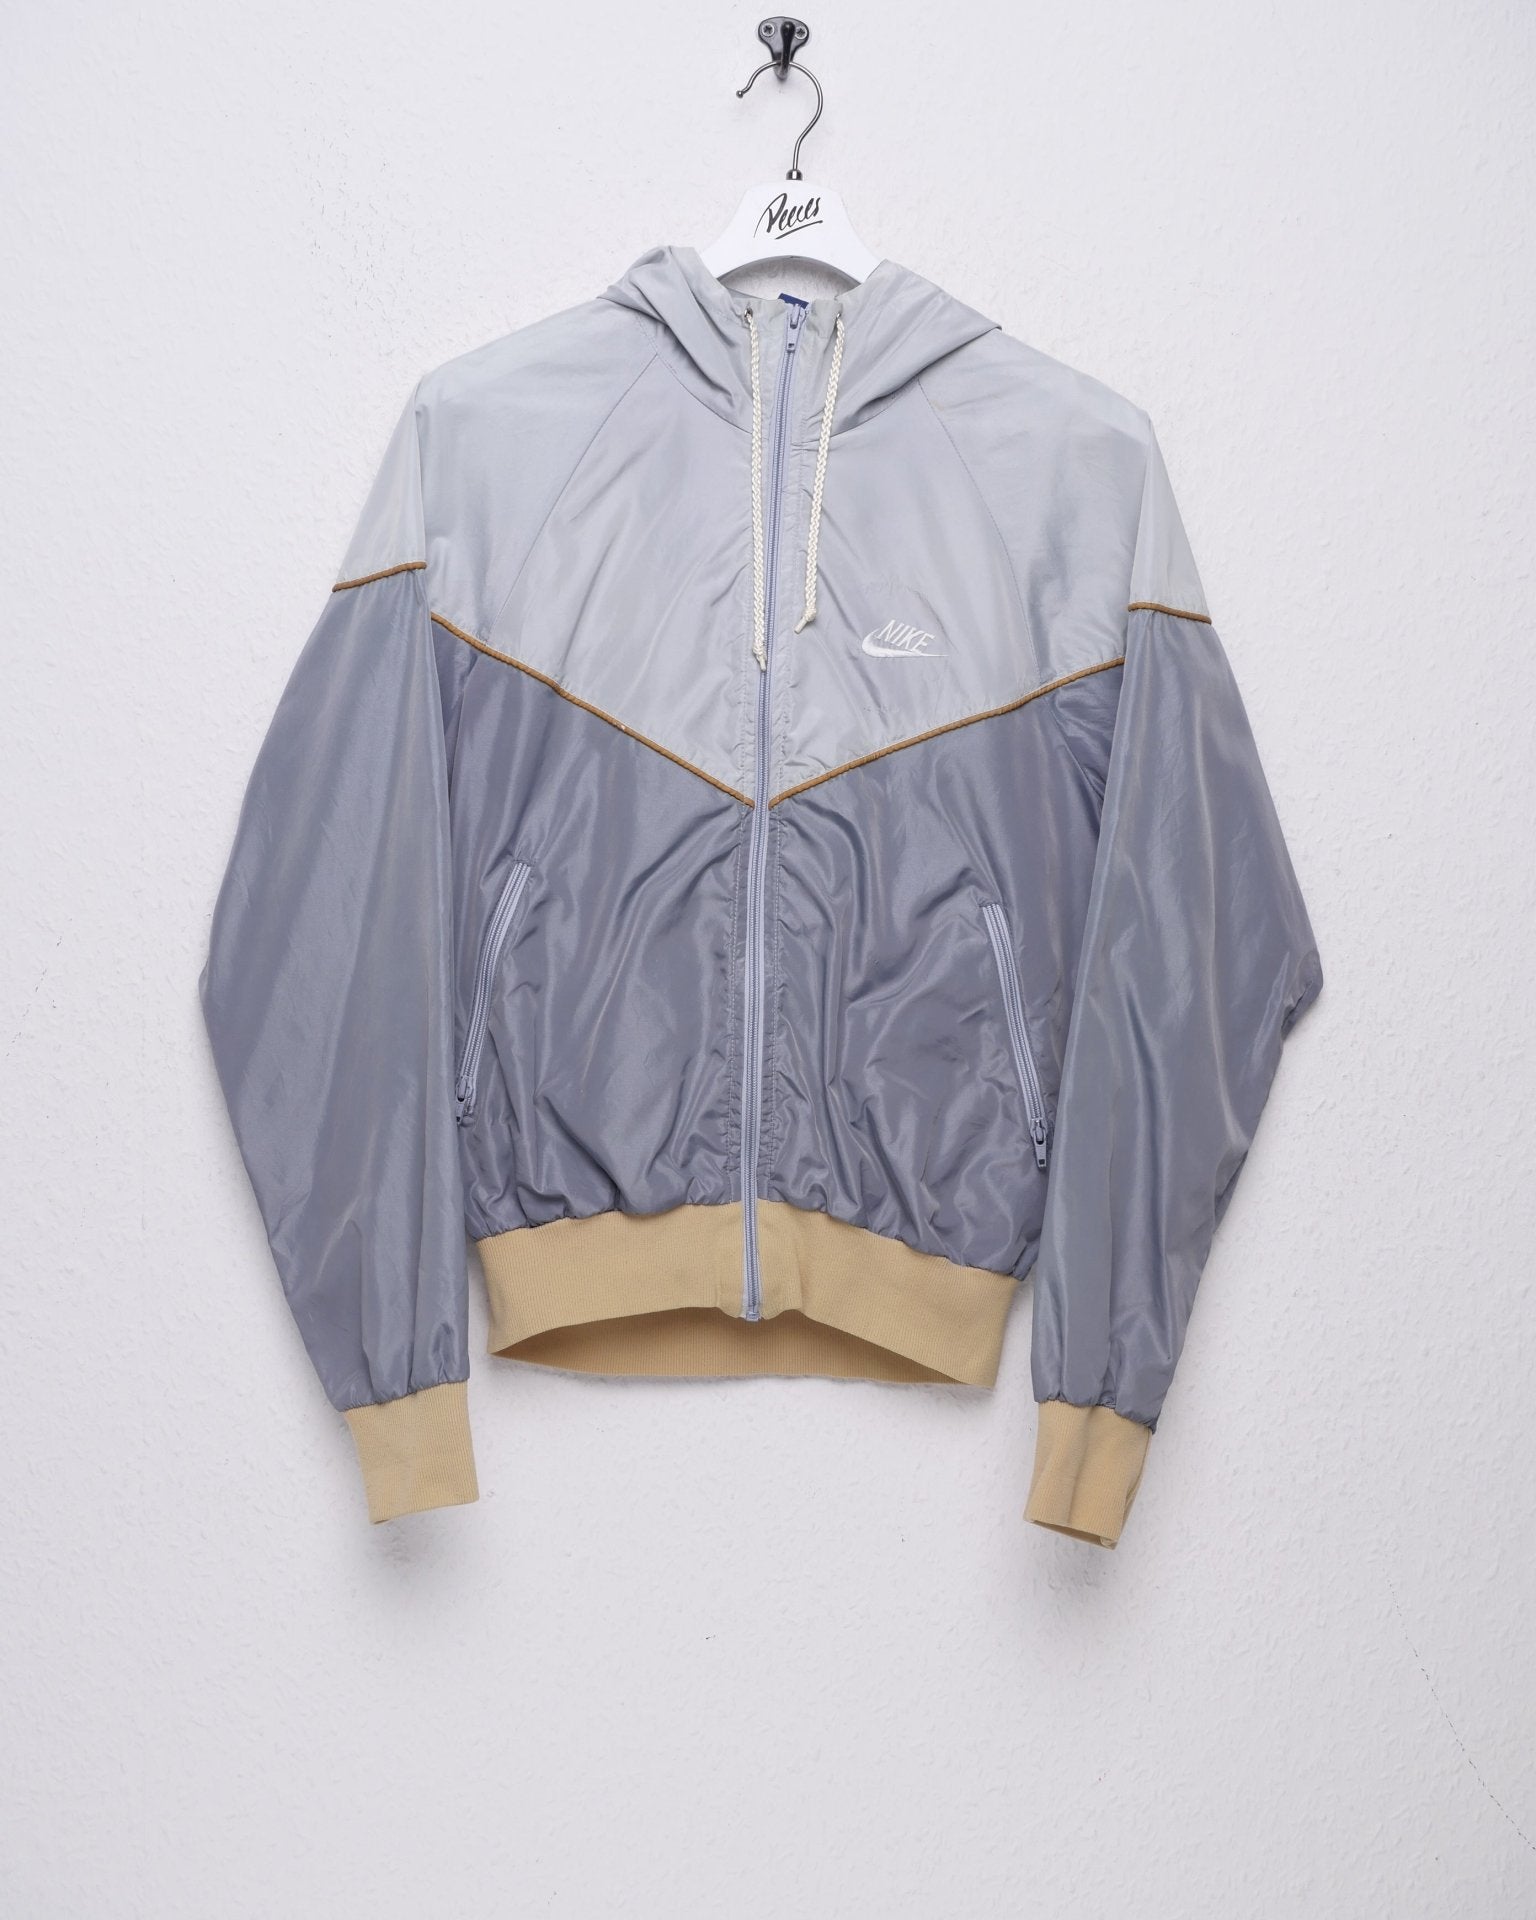 Nike embroidered Logo two toned Track Jacket - Peeces